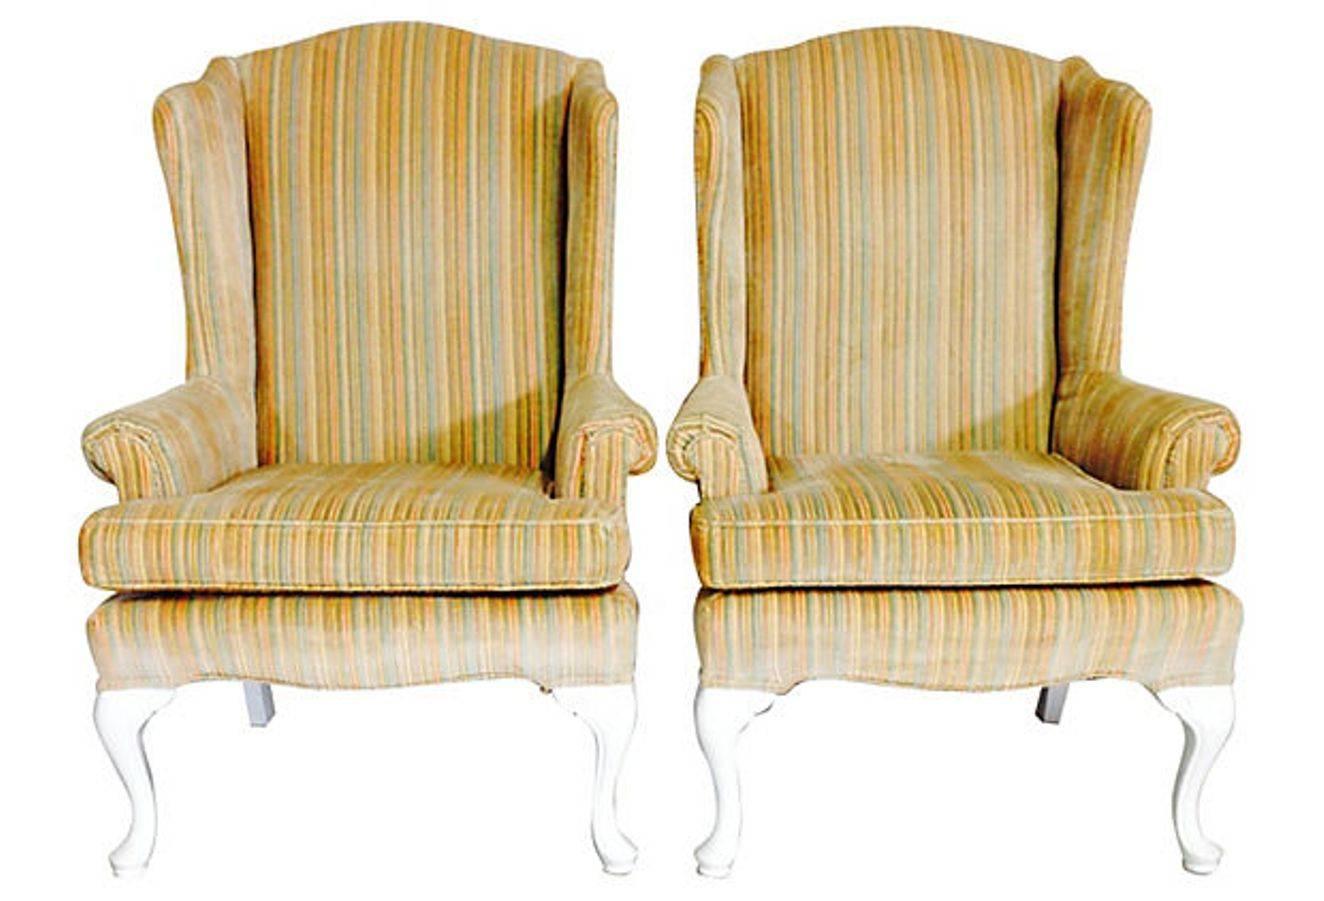 20th Century Pair Of American Queen Anne Style Wing Back Chairs For Sale 9